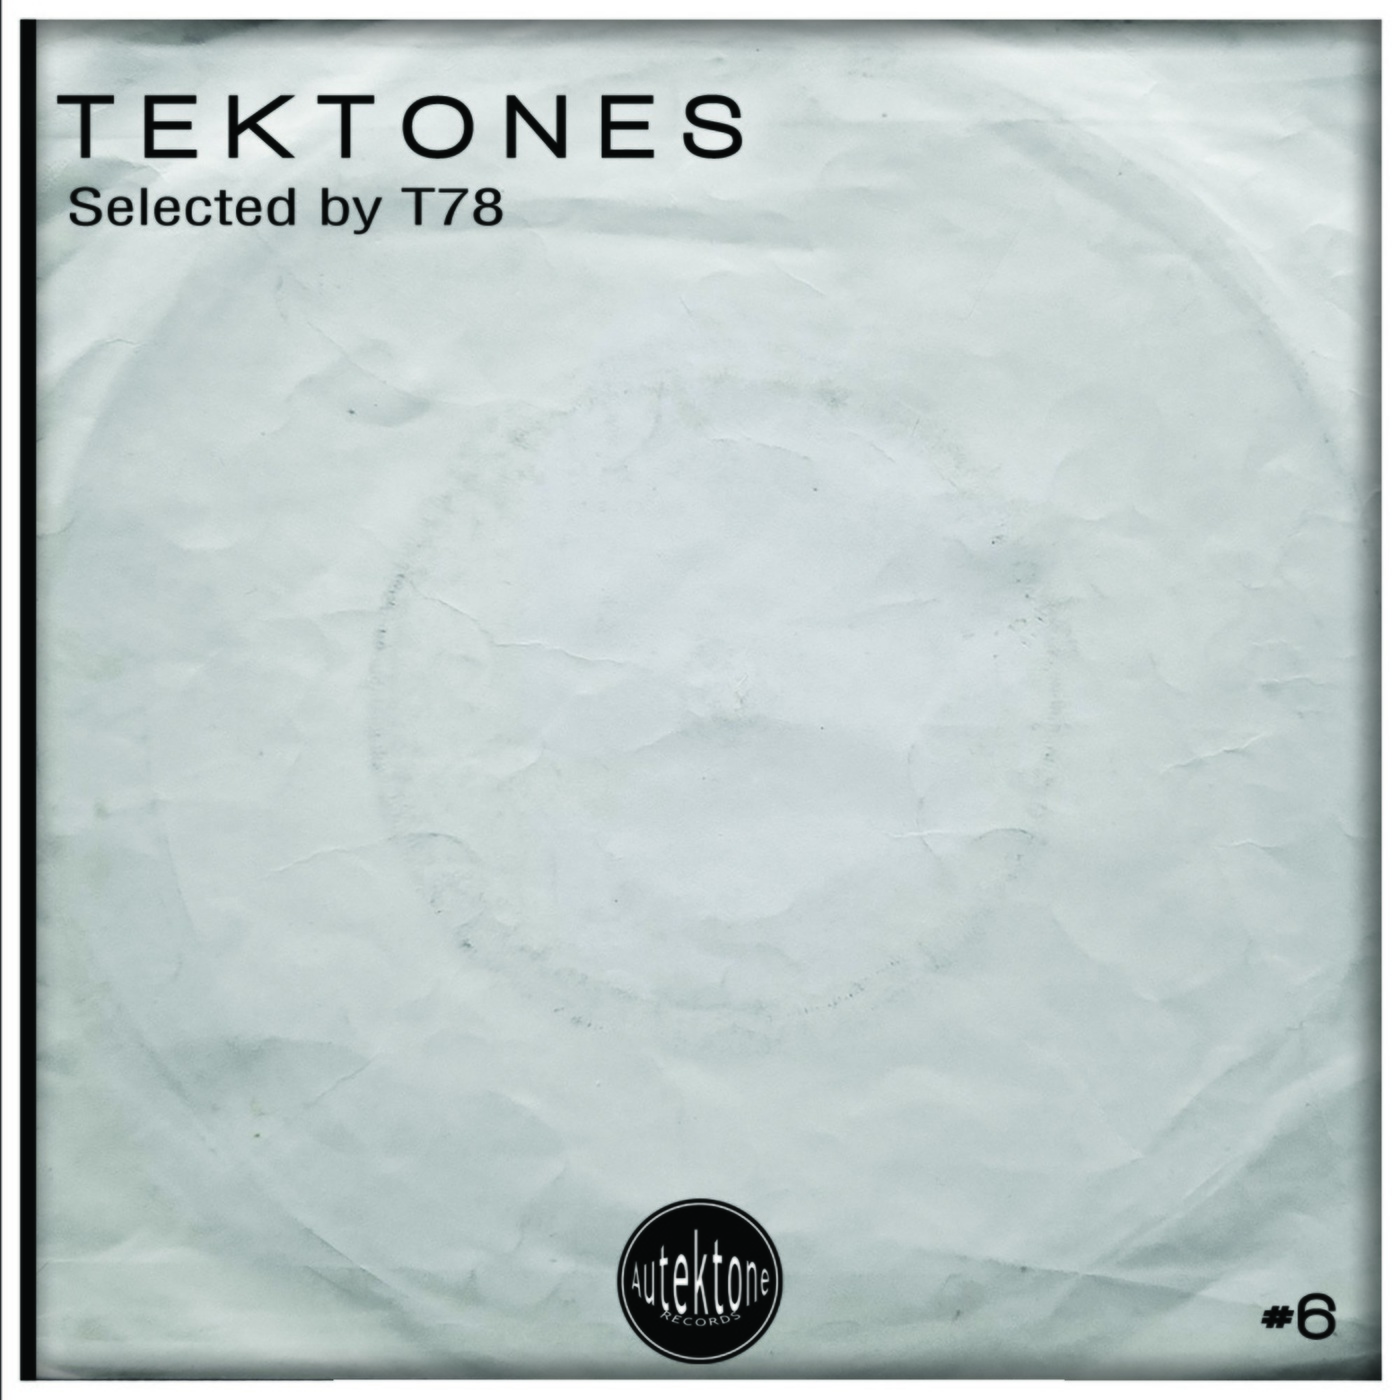 Download Tektones #6 (Selected by T78) on Electrobuzz